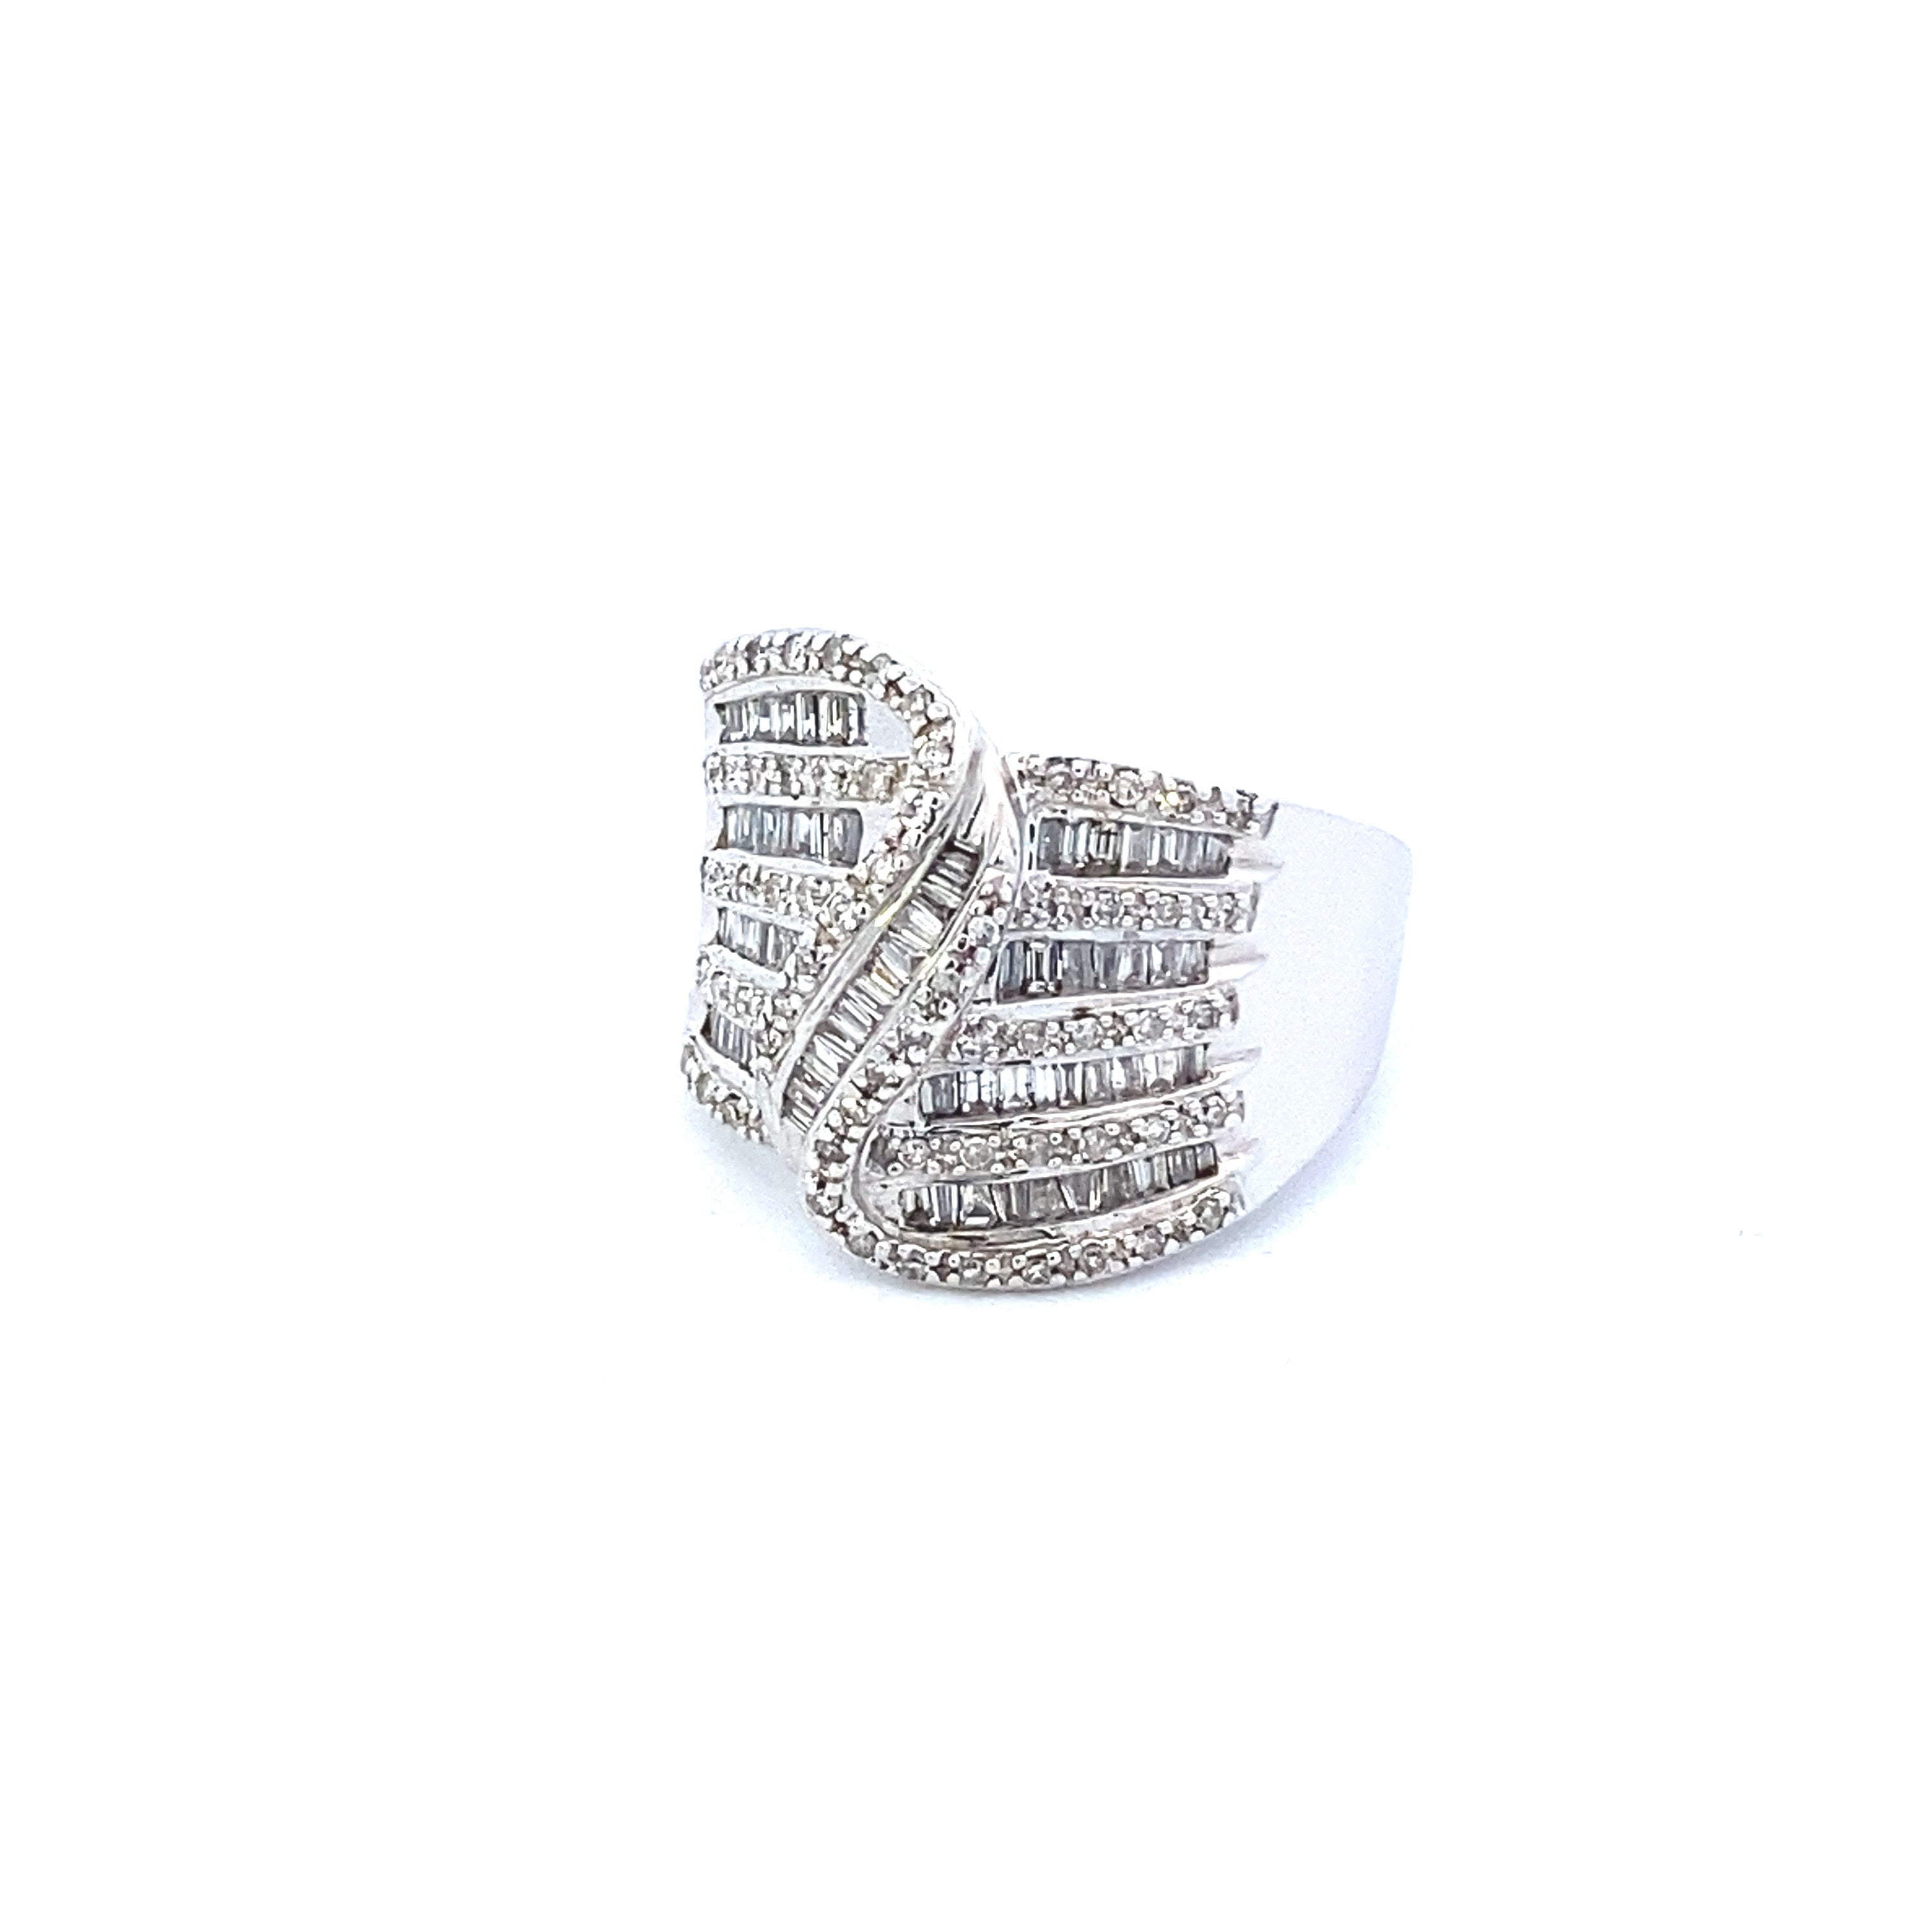 Multi Row Ring with 2 Carat Diamonds in 14kt White Gold